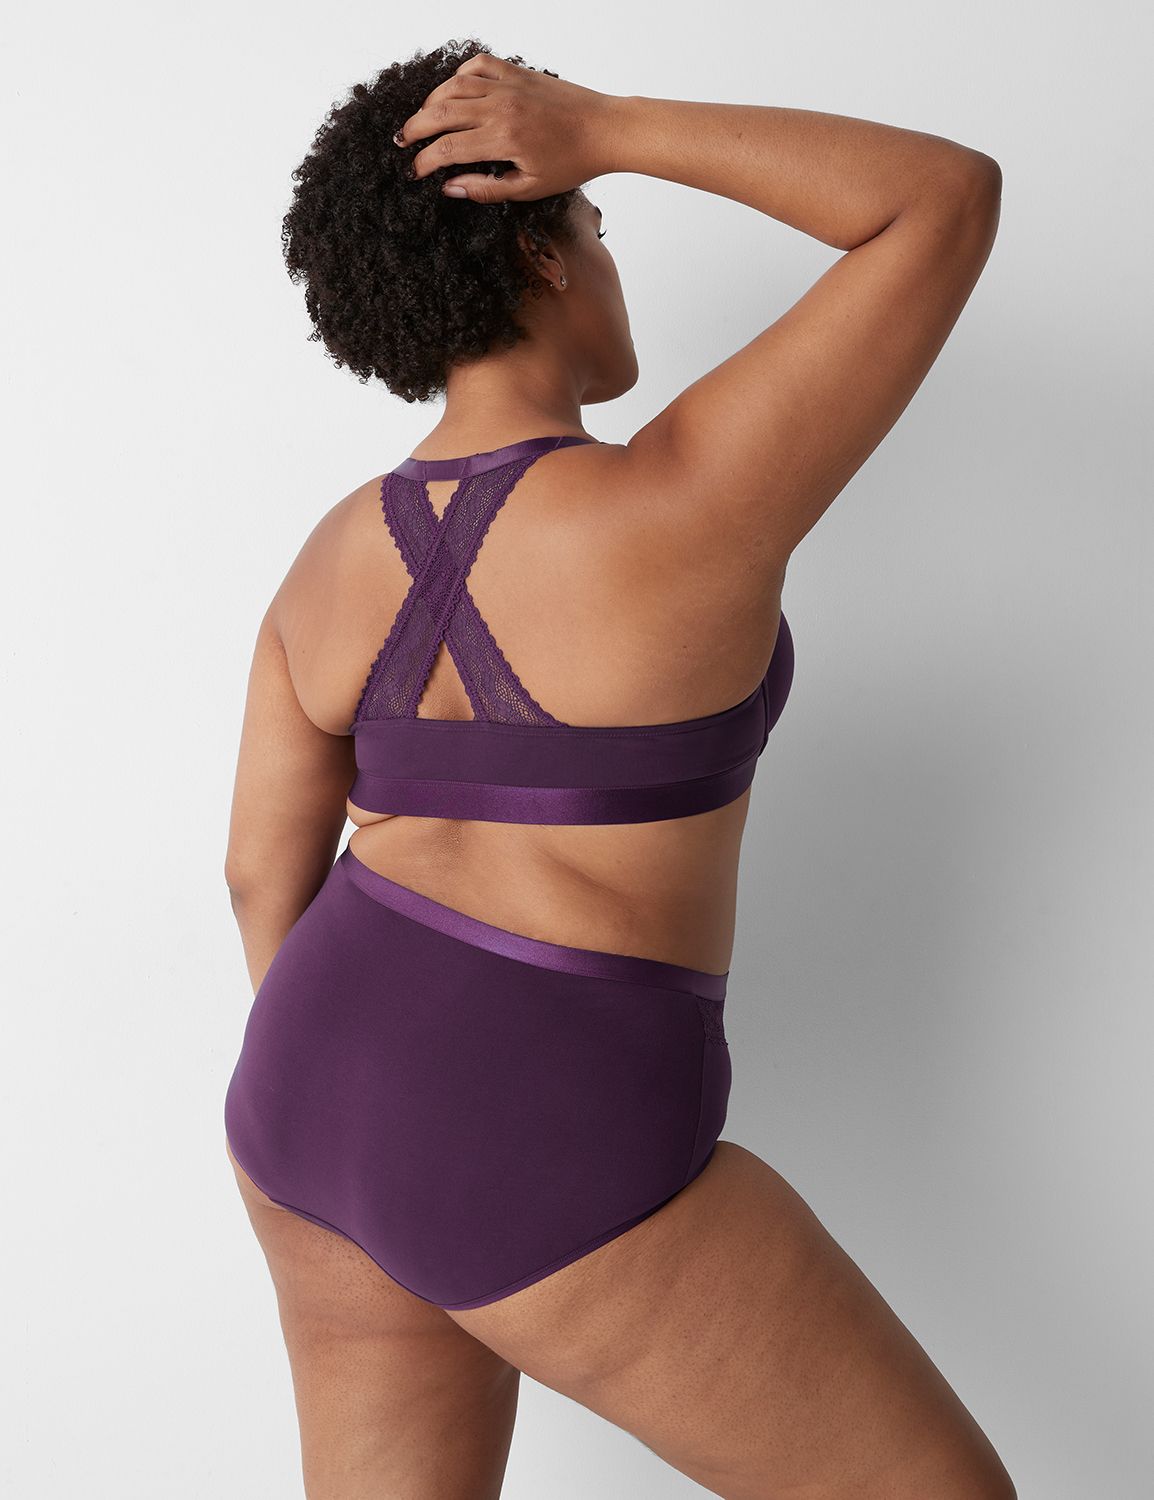 Lane Bryant - 7/$35 panties until tonight. Because one-day-only #Saturdaze  deals > not setting an alarm on the weekends.